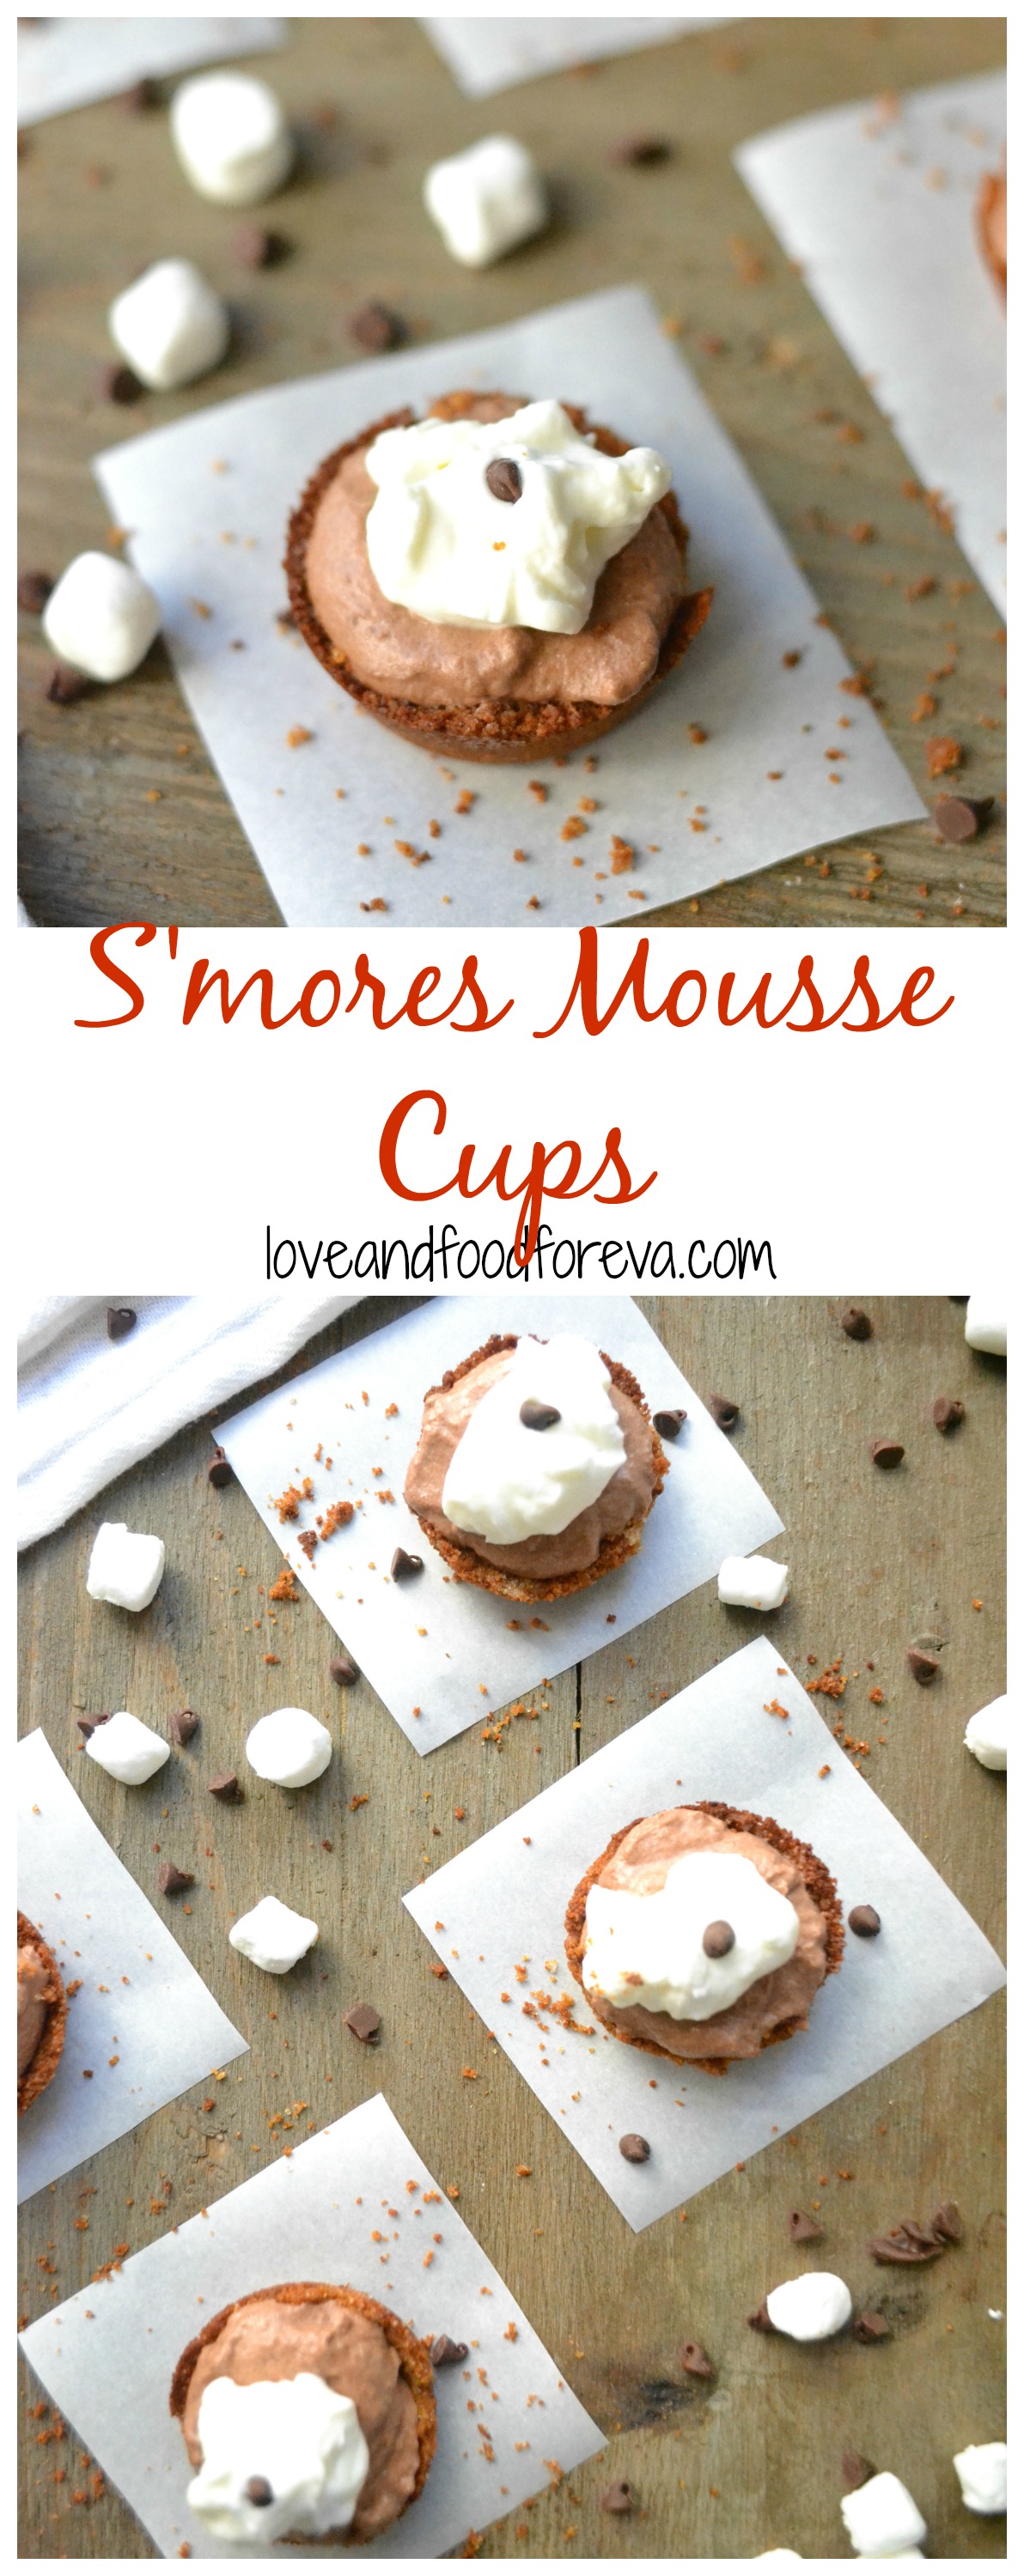 S'mores Mousse Cups are a fun, new way to enjoy a classic childhood favorite!